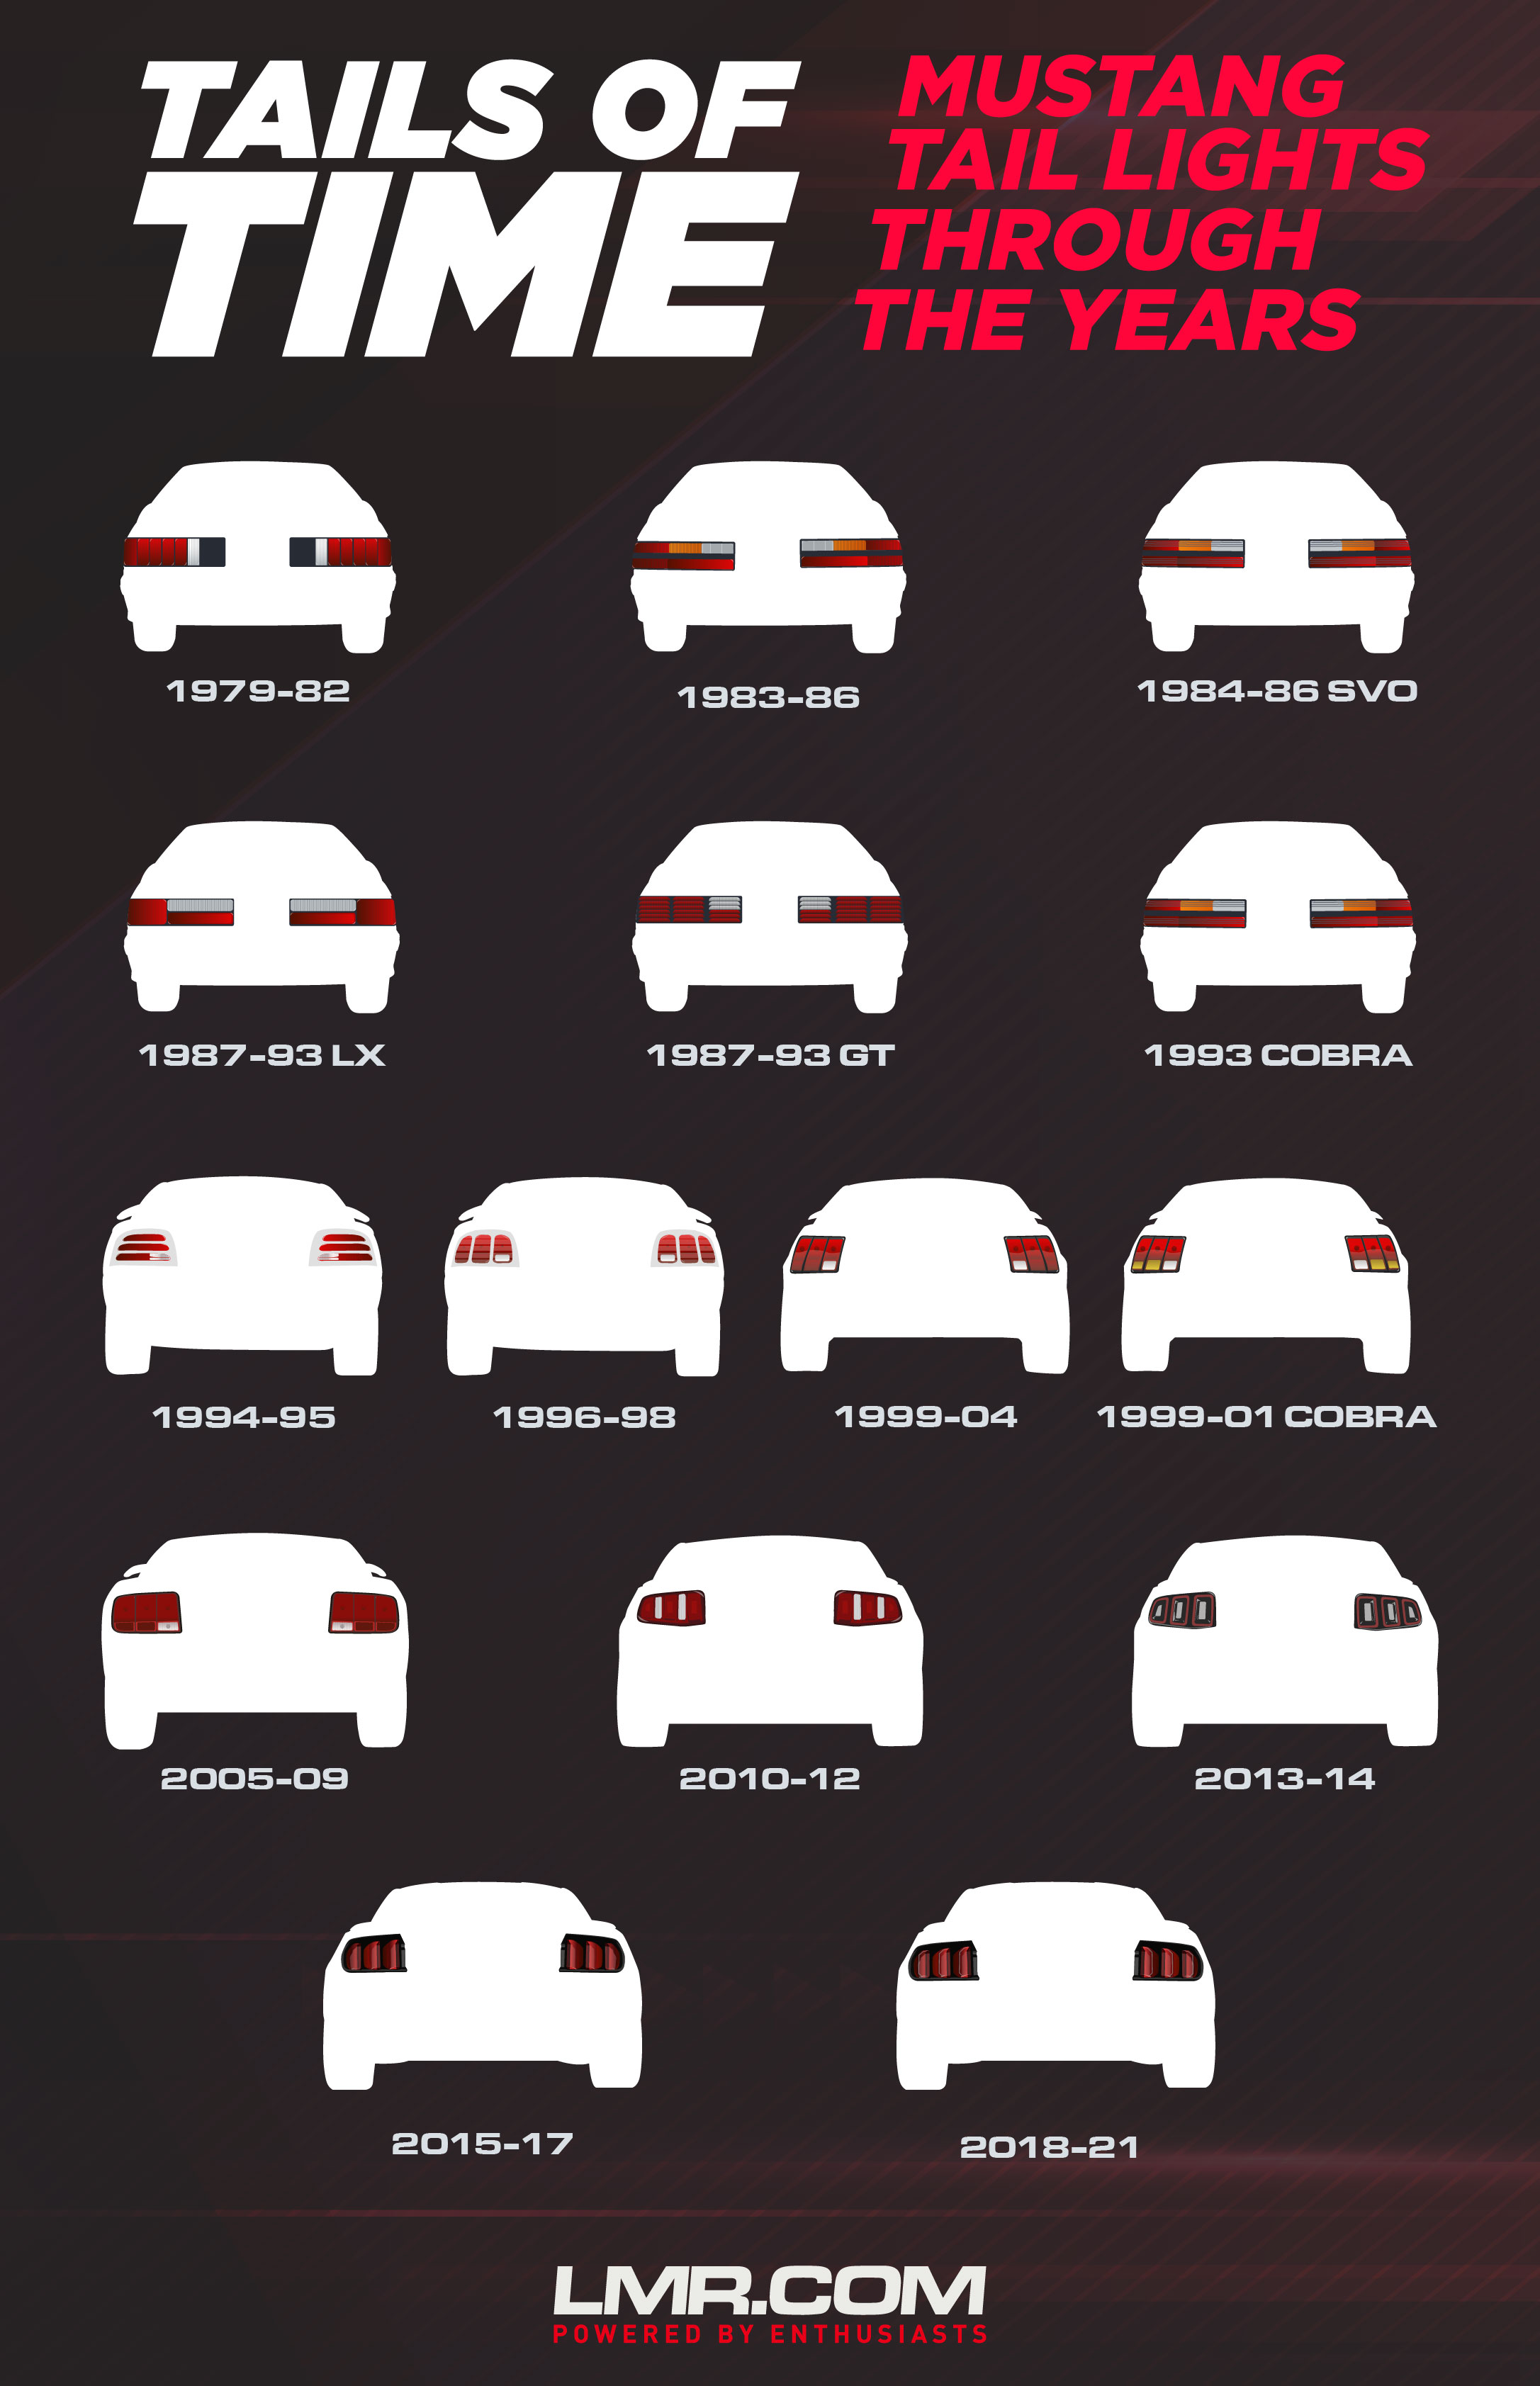 Ford Mustang Tail Lights Through The Years | 1979-2021 - Ford Mustang Tail Lights Through The Years | 1979-2021